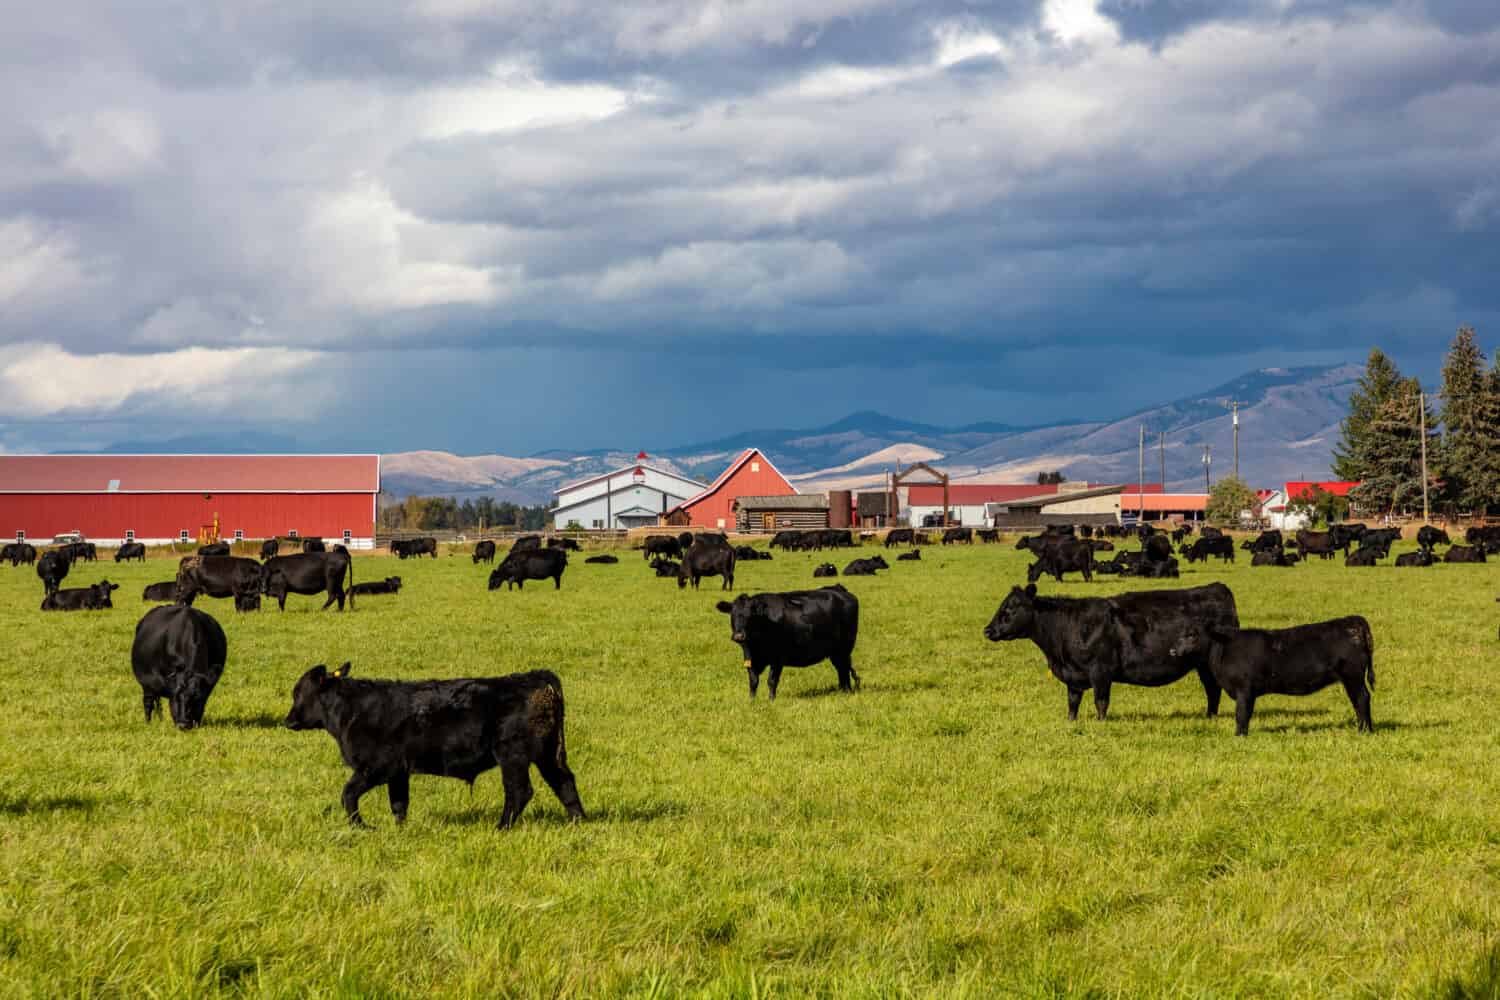 Black angus cattle graze in pasture at Fort Owen State Park in Stevensville, USA